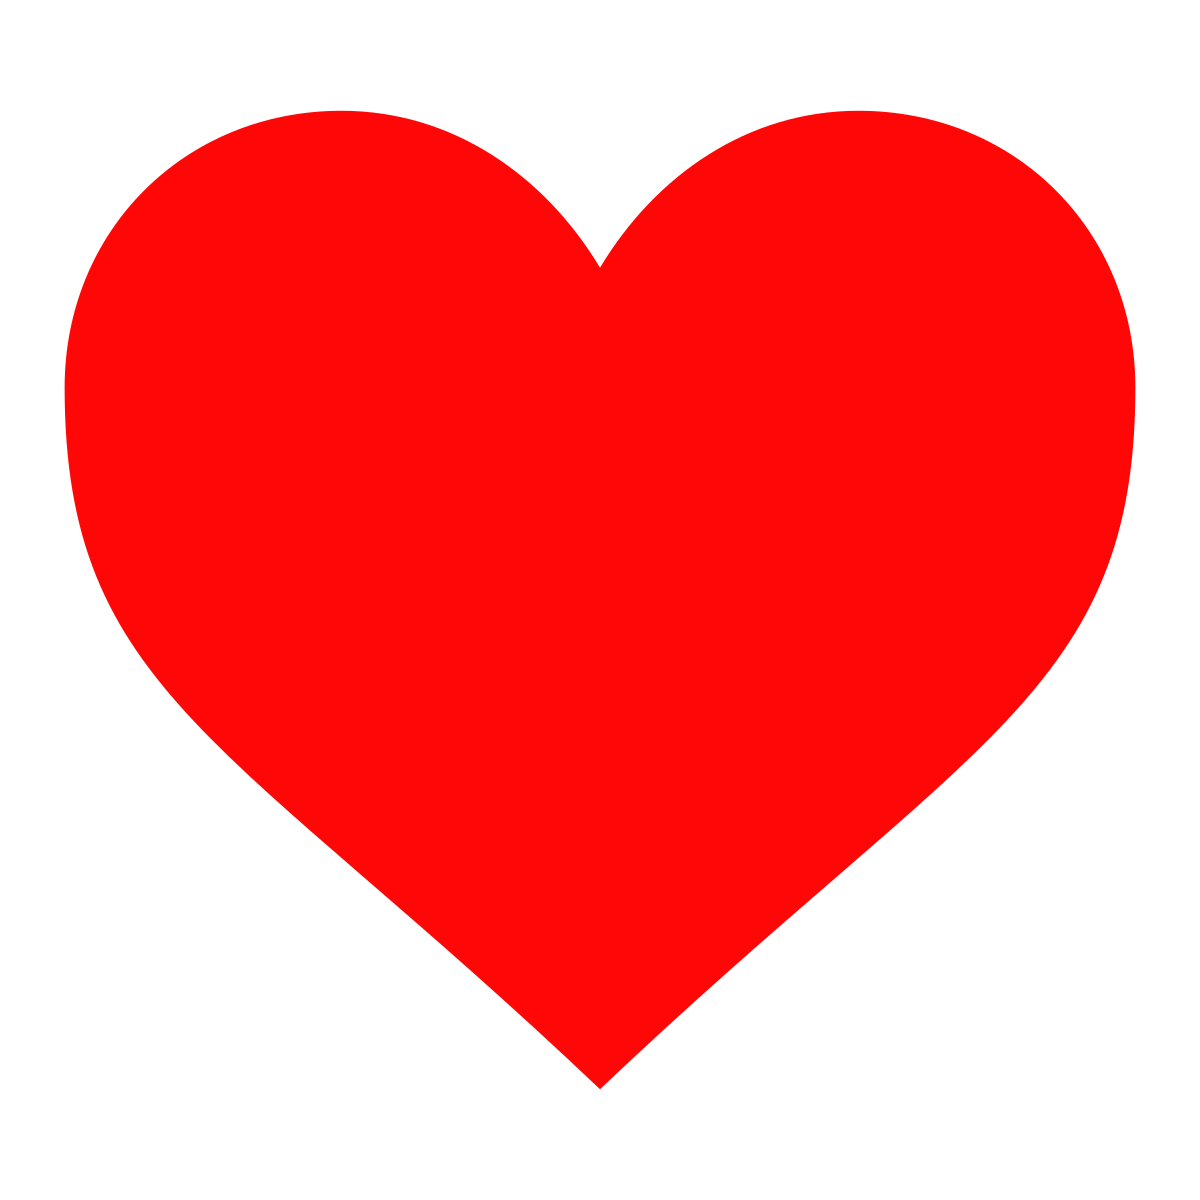 Heart Vector Red Photos Free Photo PNG Image